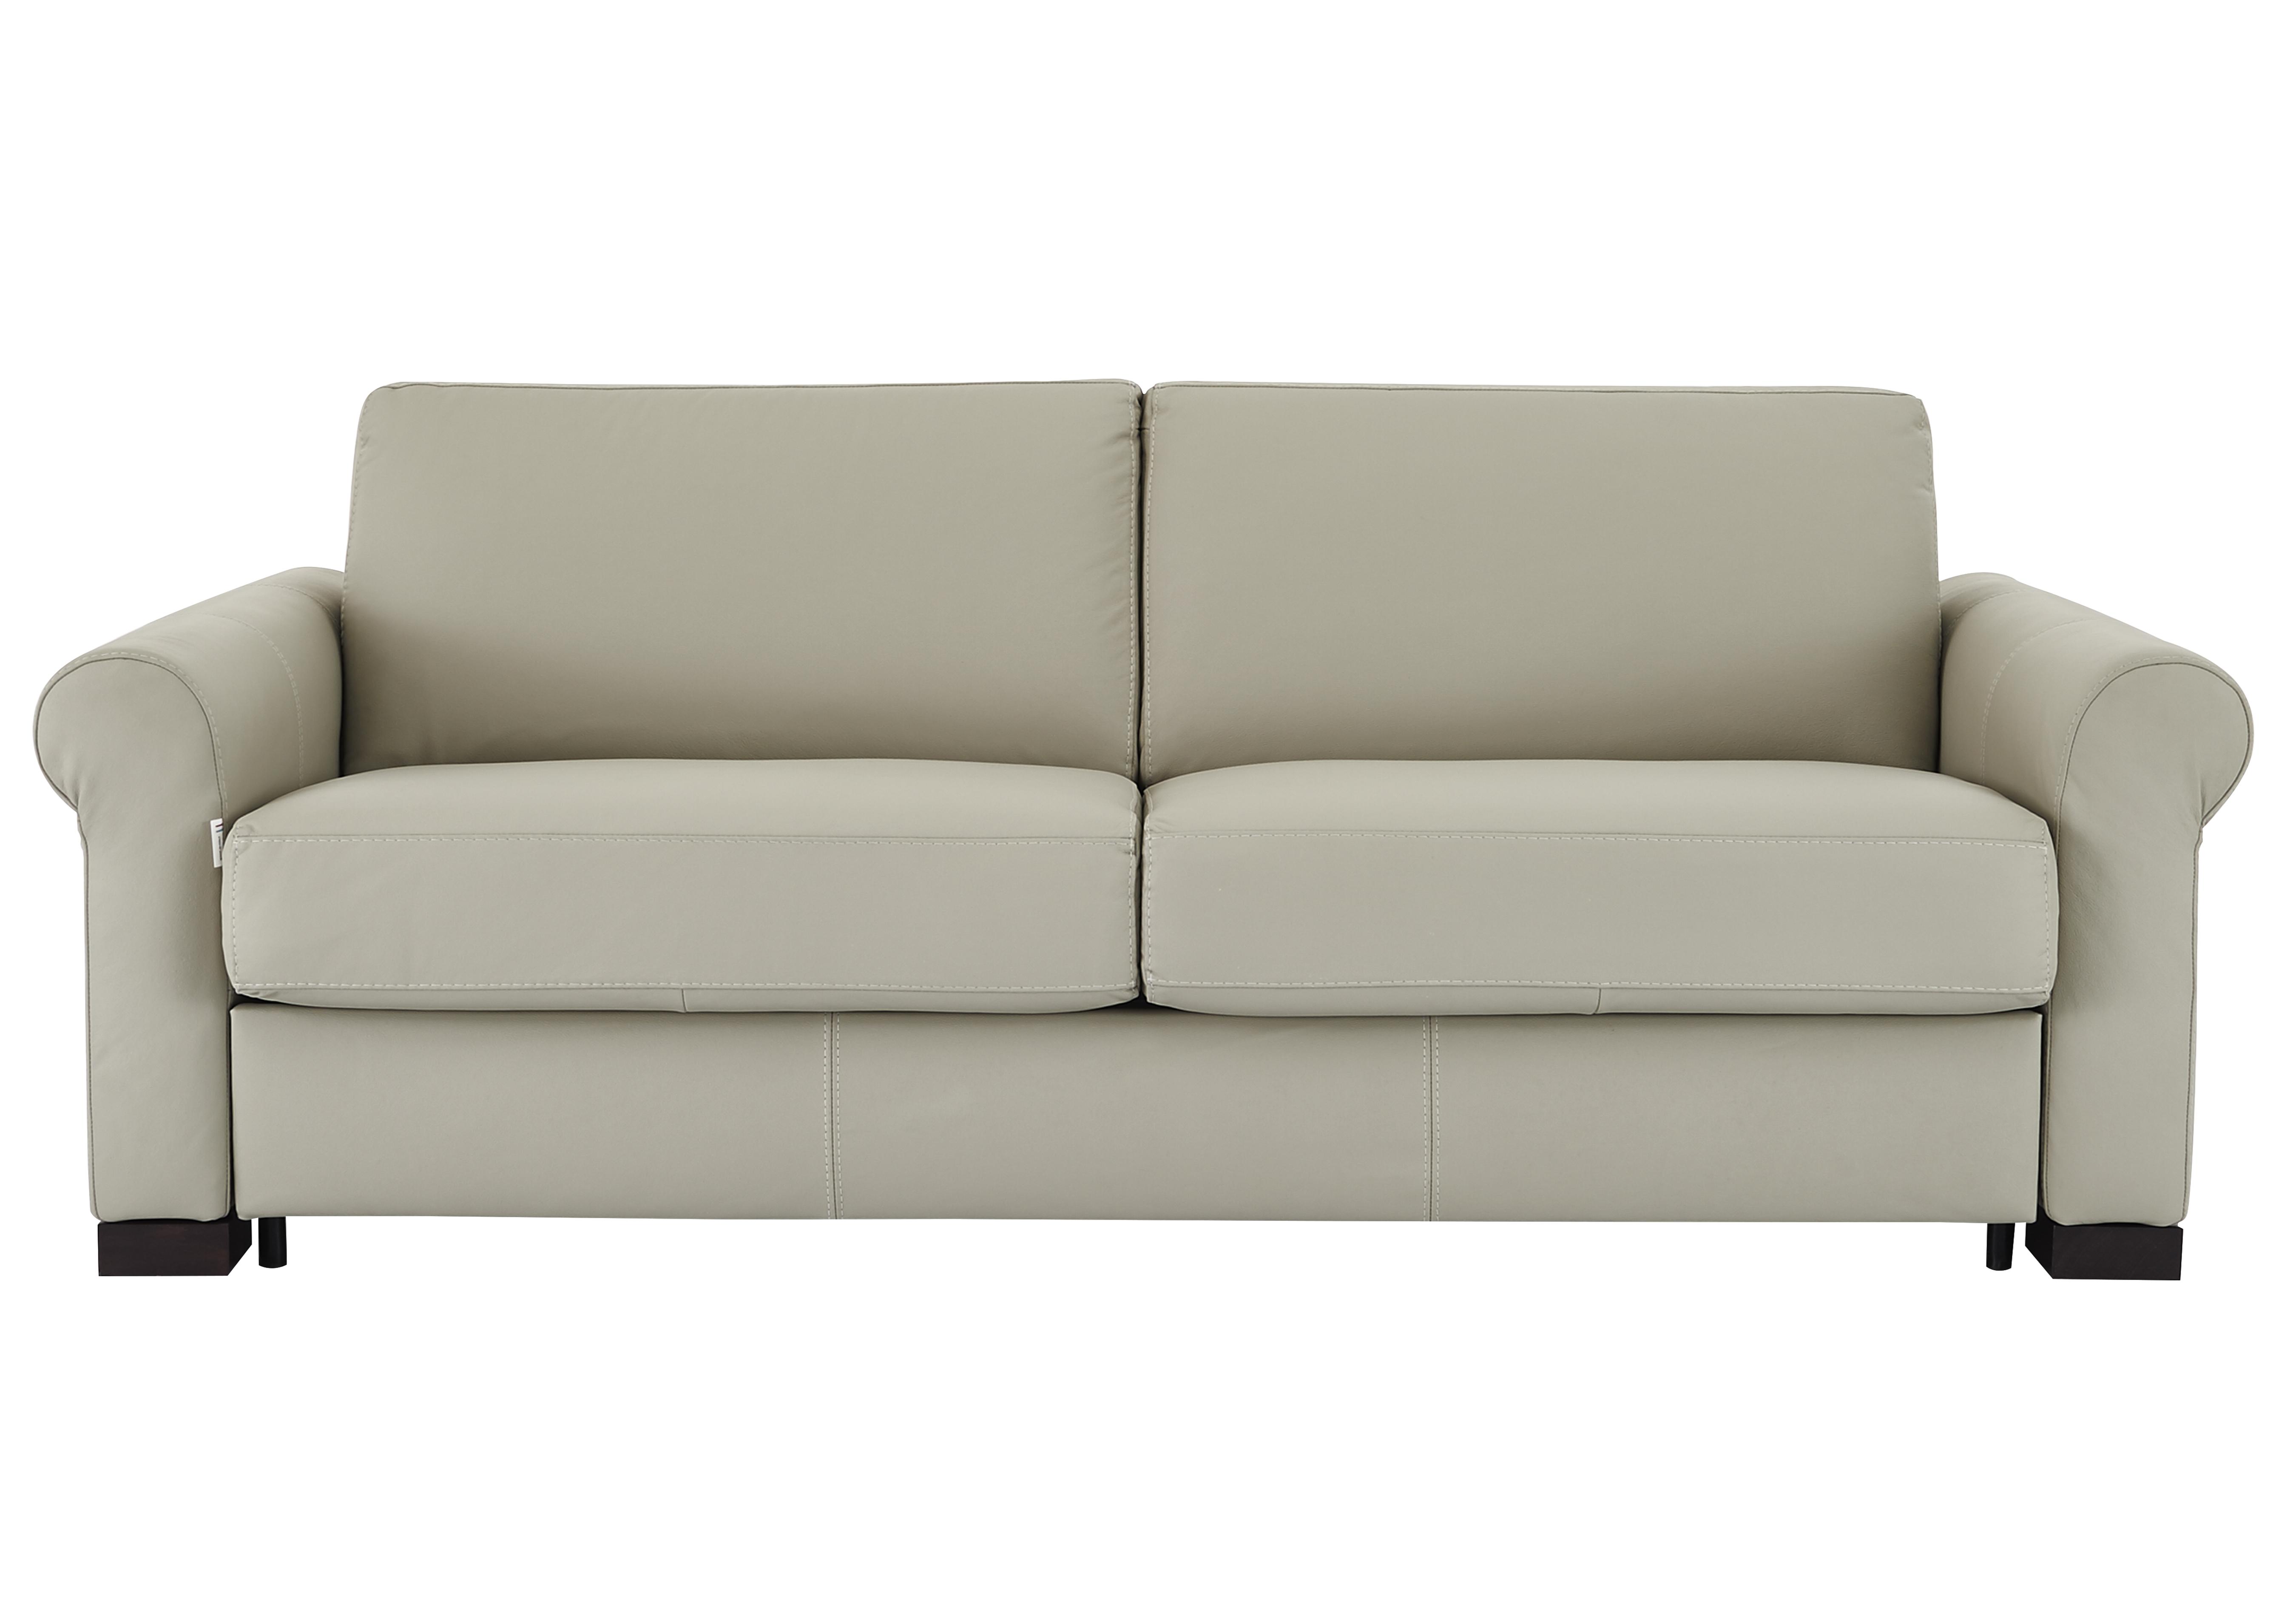 Alcova 3 Seater Leather Sofa Bed with Scroll Arms in Torello Tortora 328 on Furniture Village